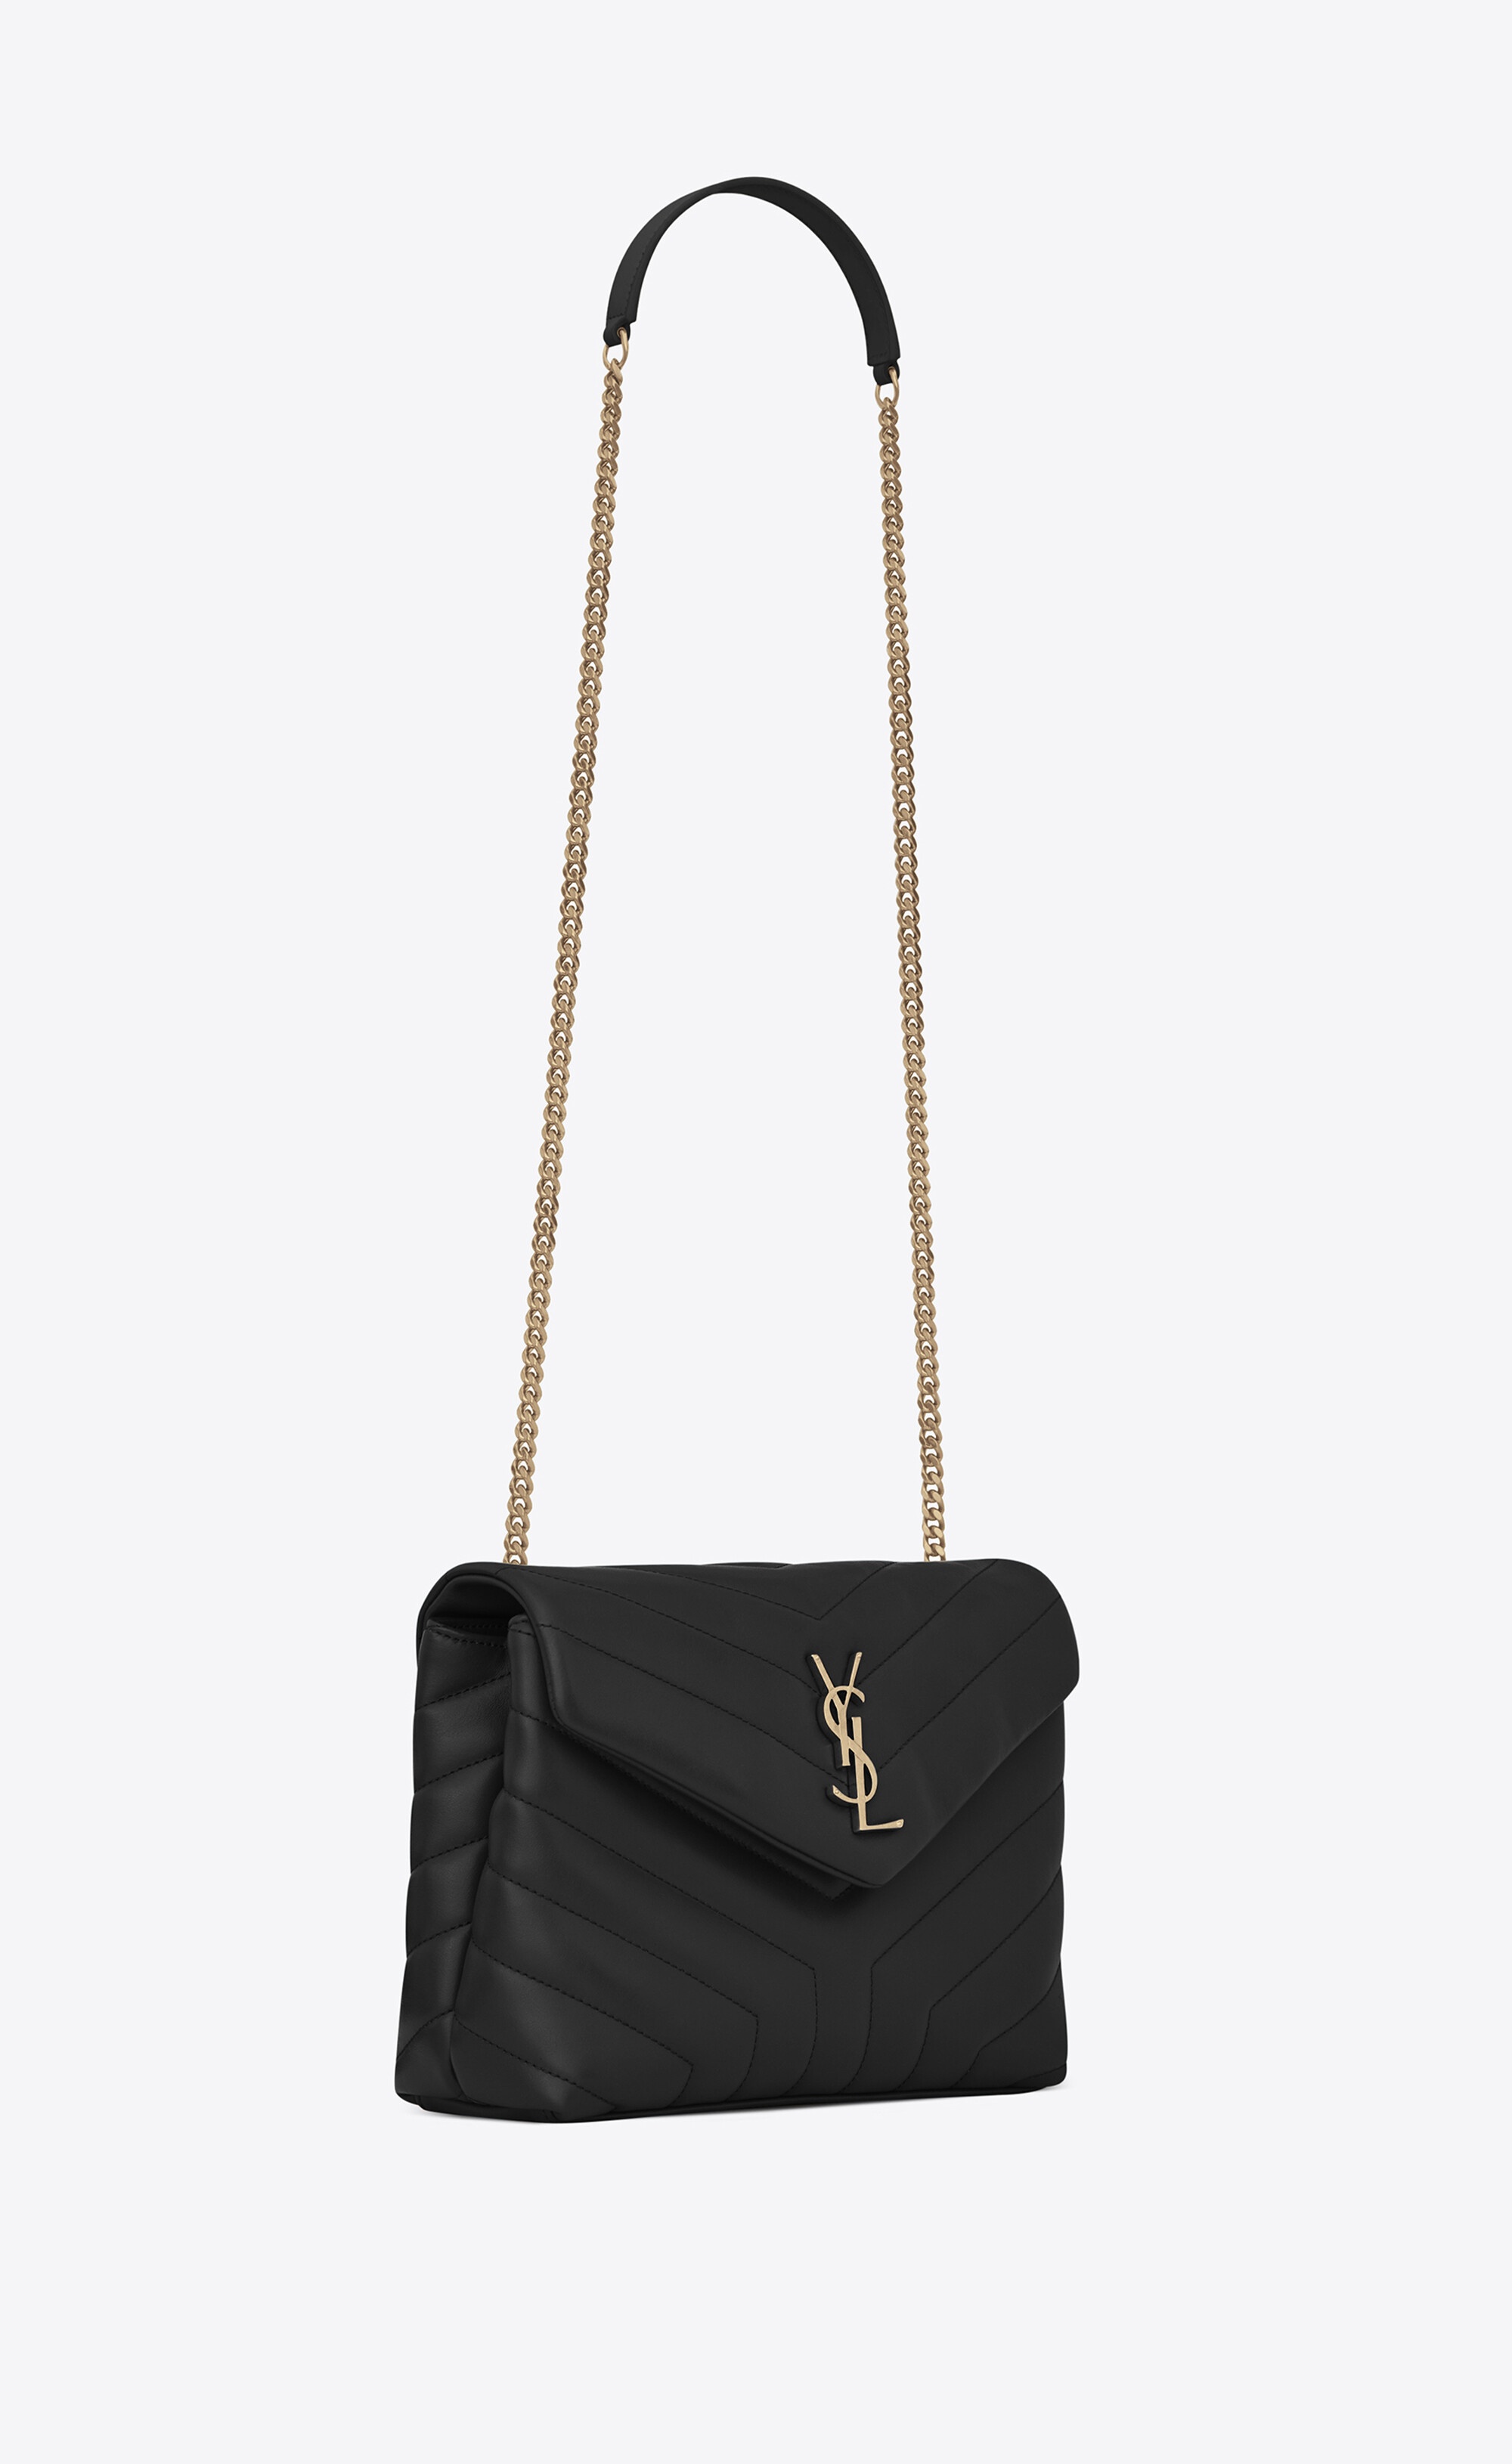 loulou small chain bag in matelassé "y" leather - 7